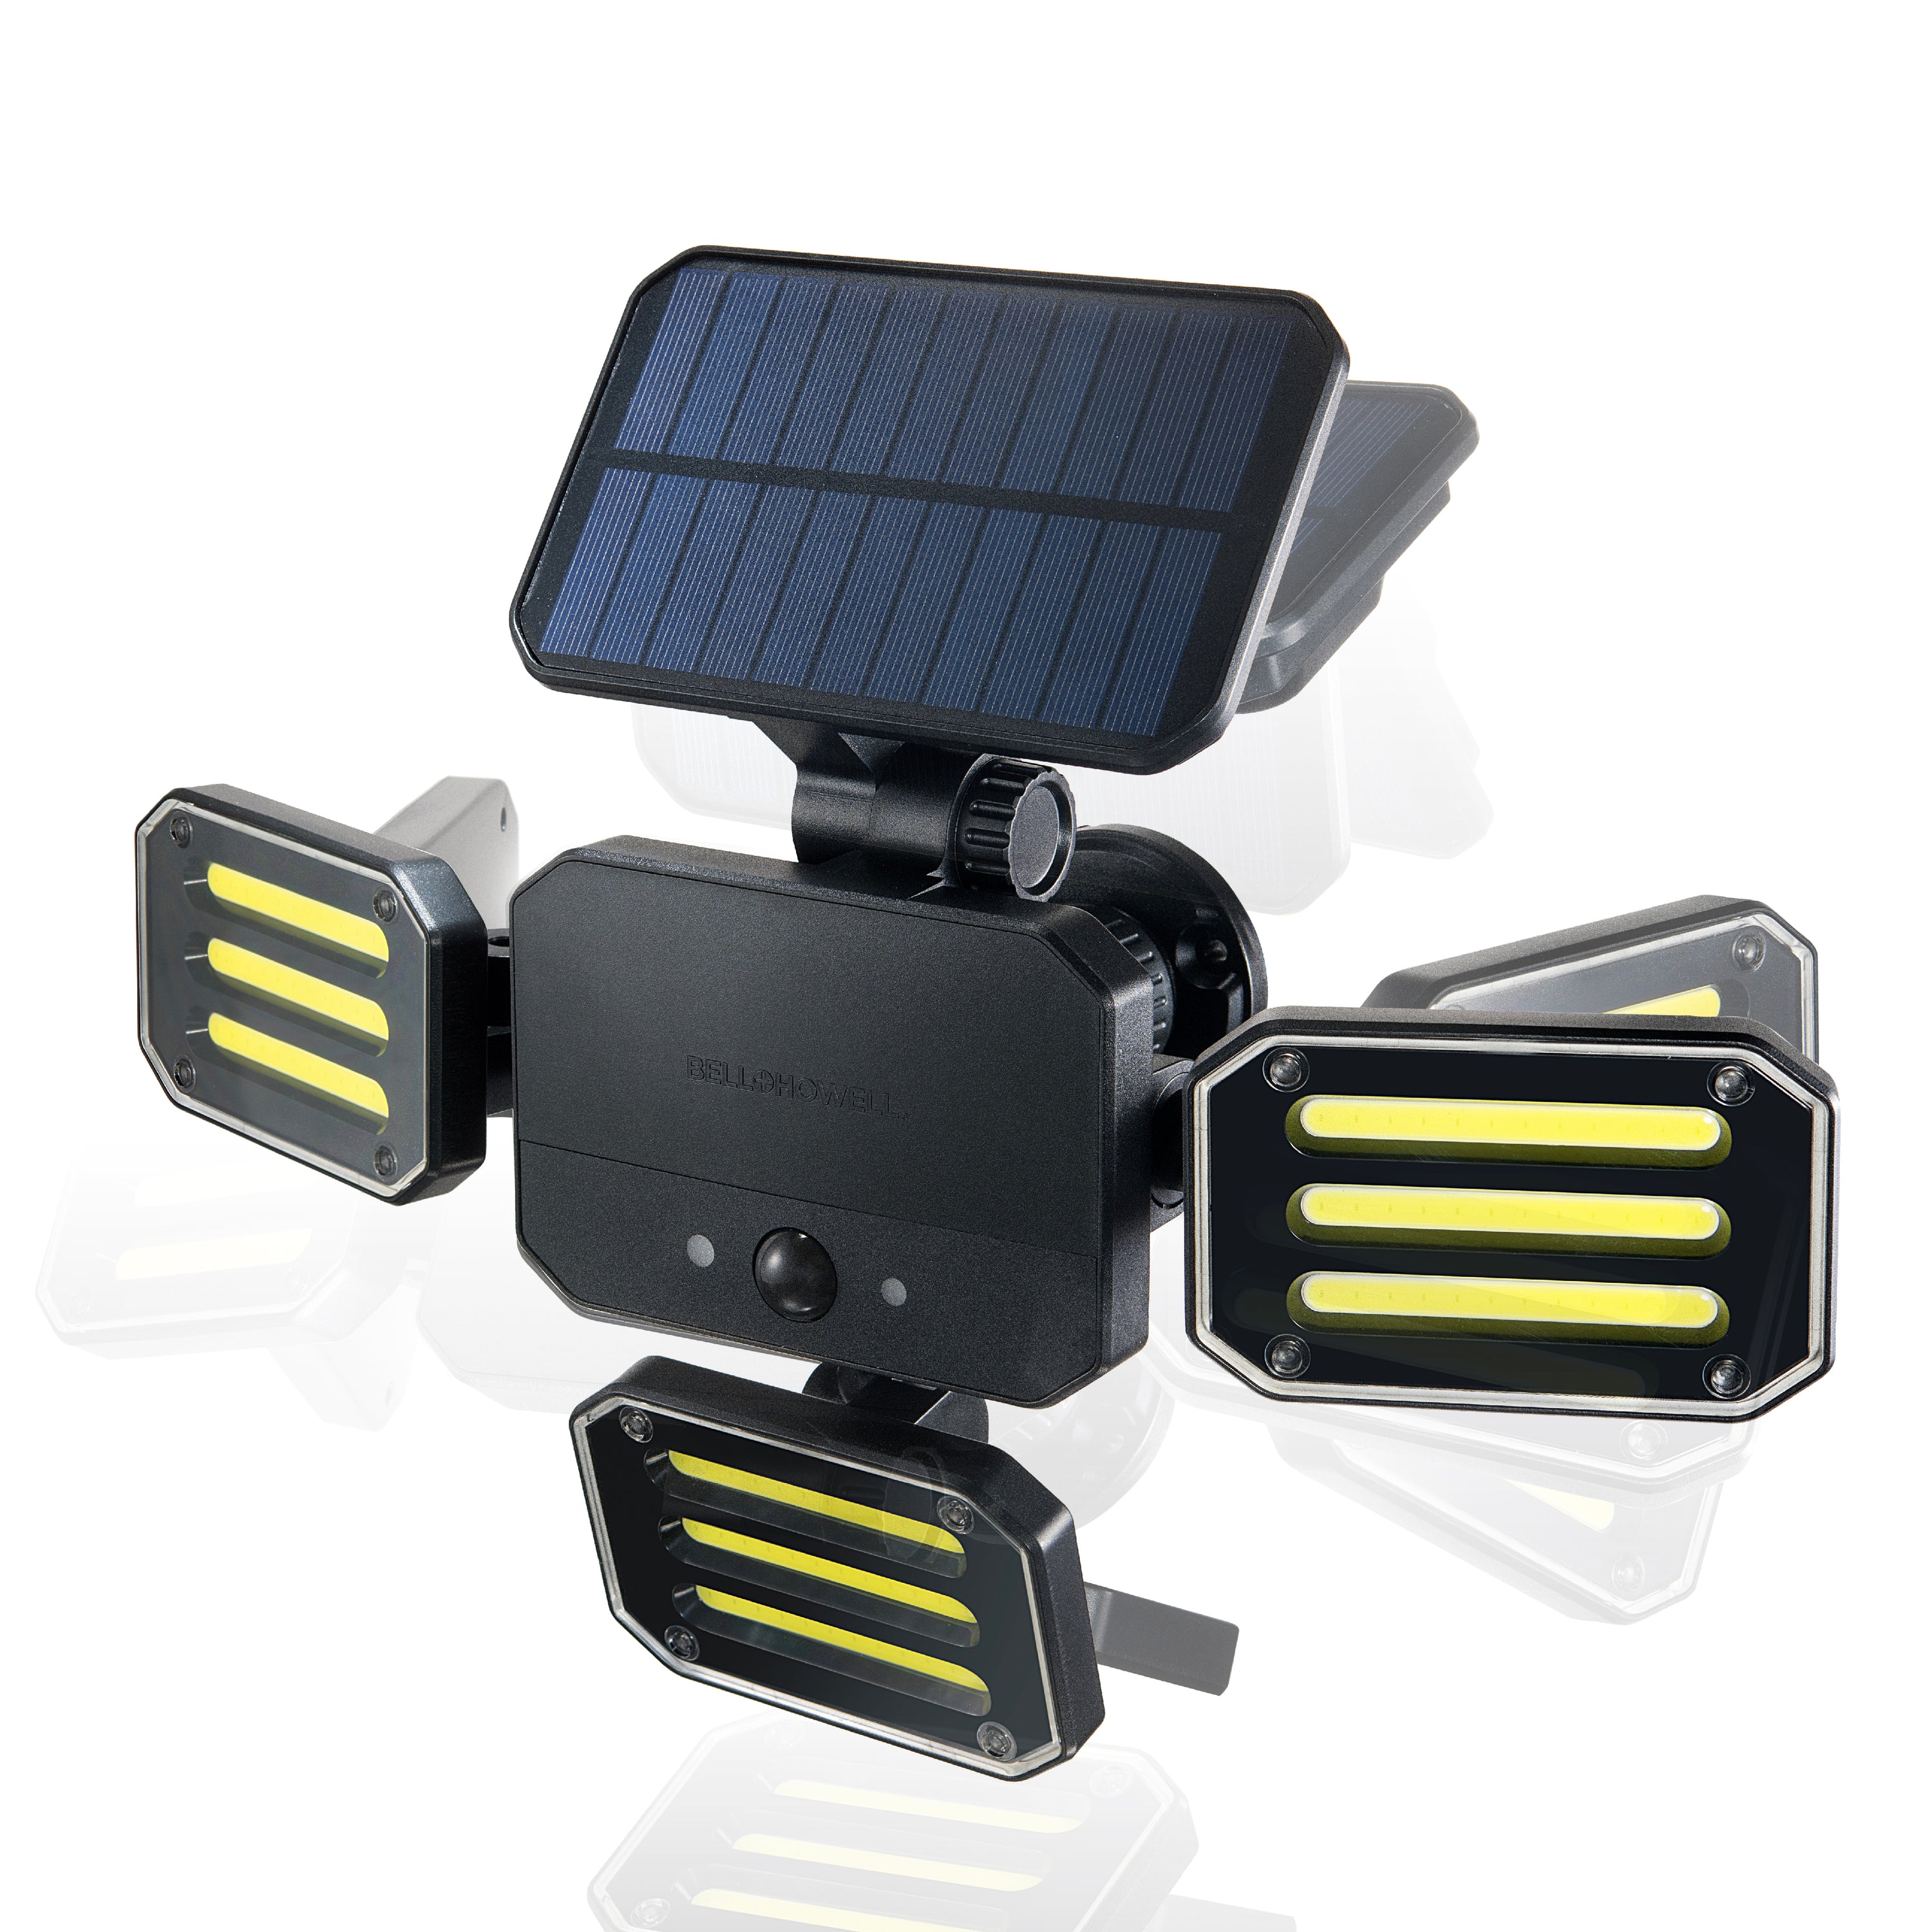 The Original Bell + Howell Bionic Remote Controlled Motion Activated Solar Floodlight